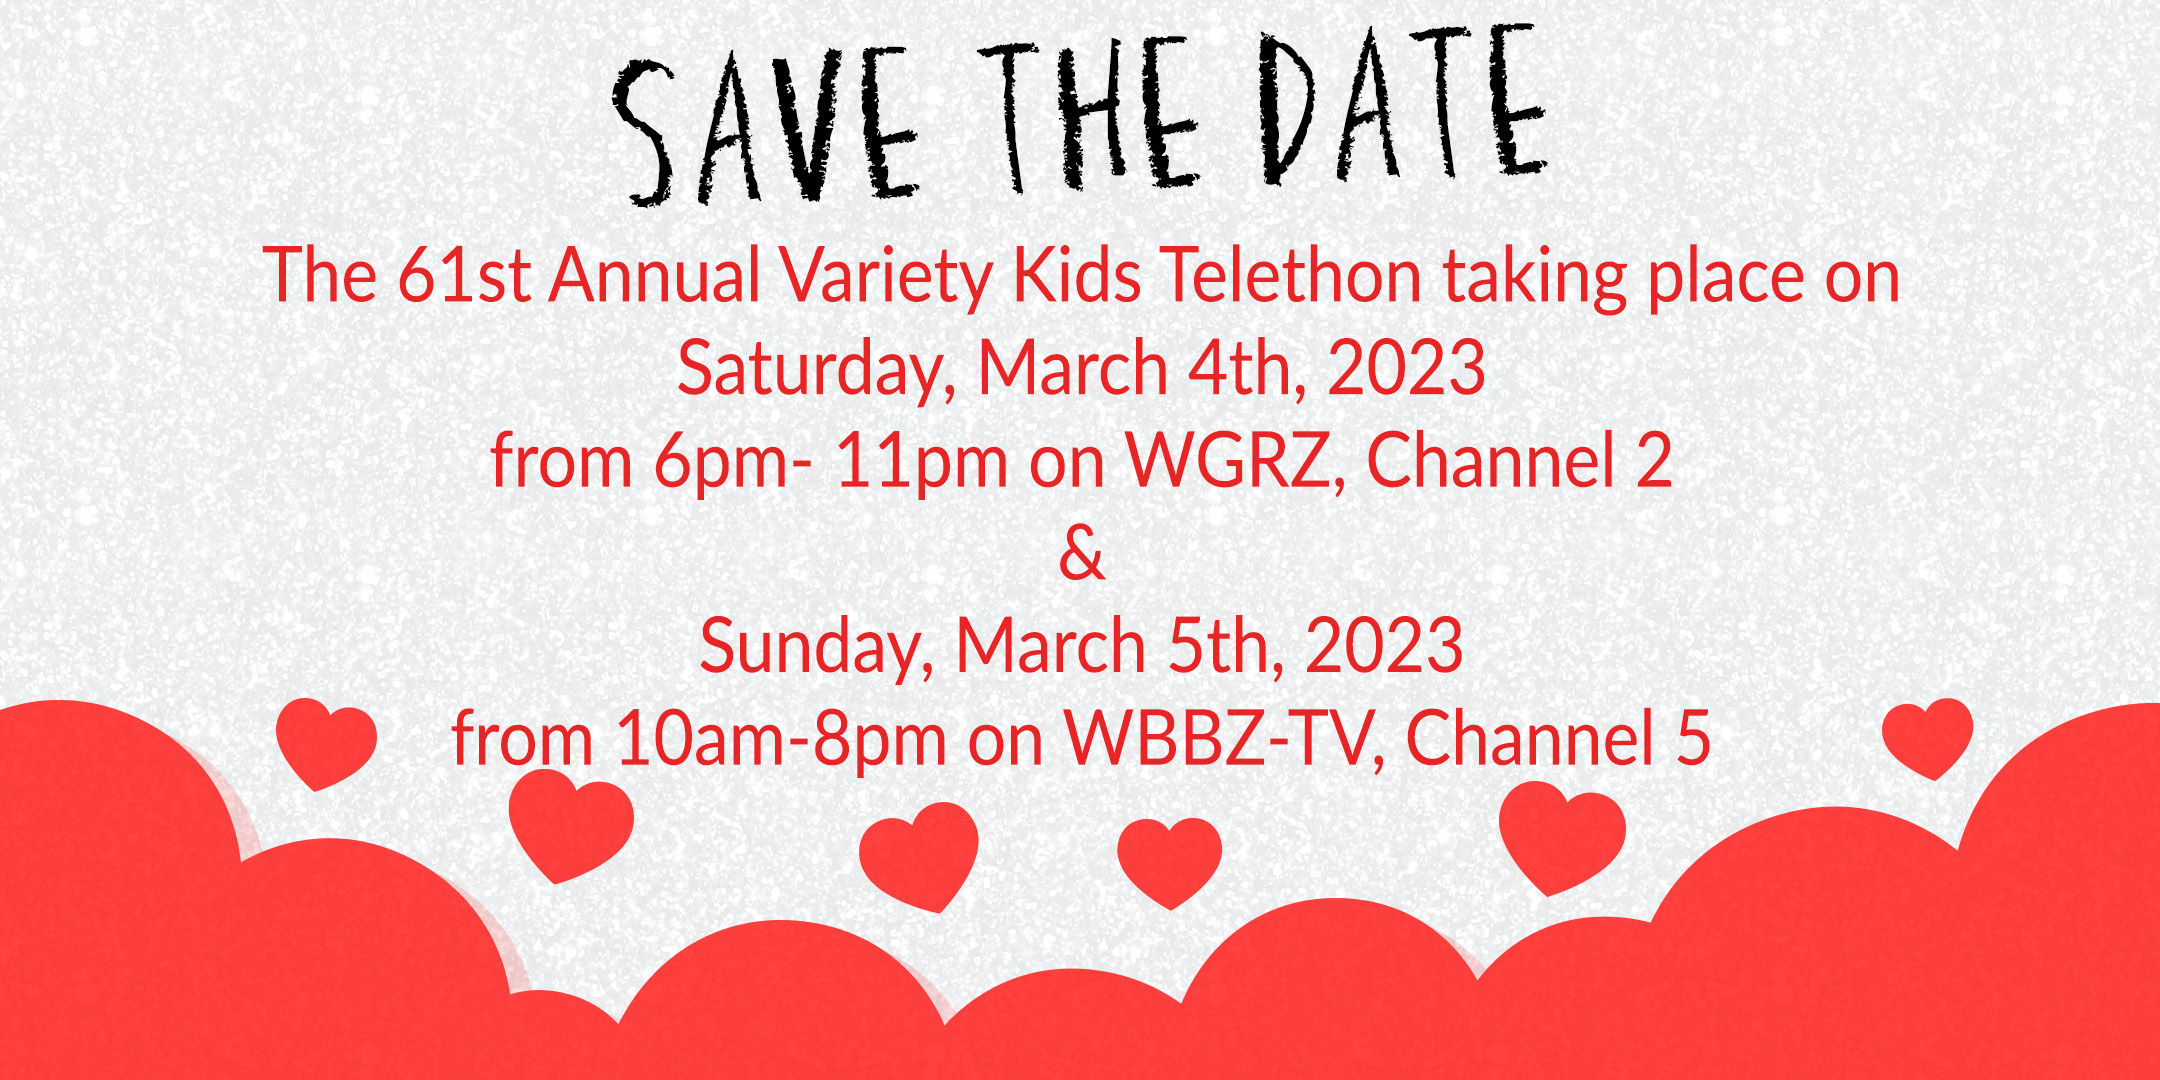 Save The Date for The 61st Annual Variety Kids Telethon!